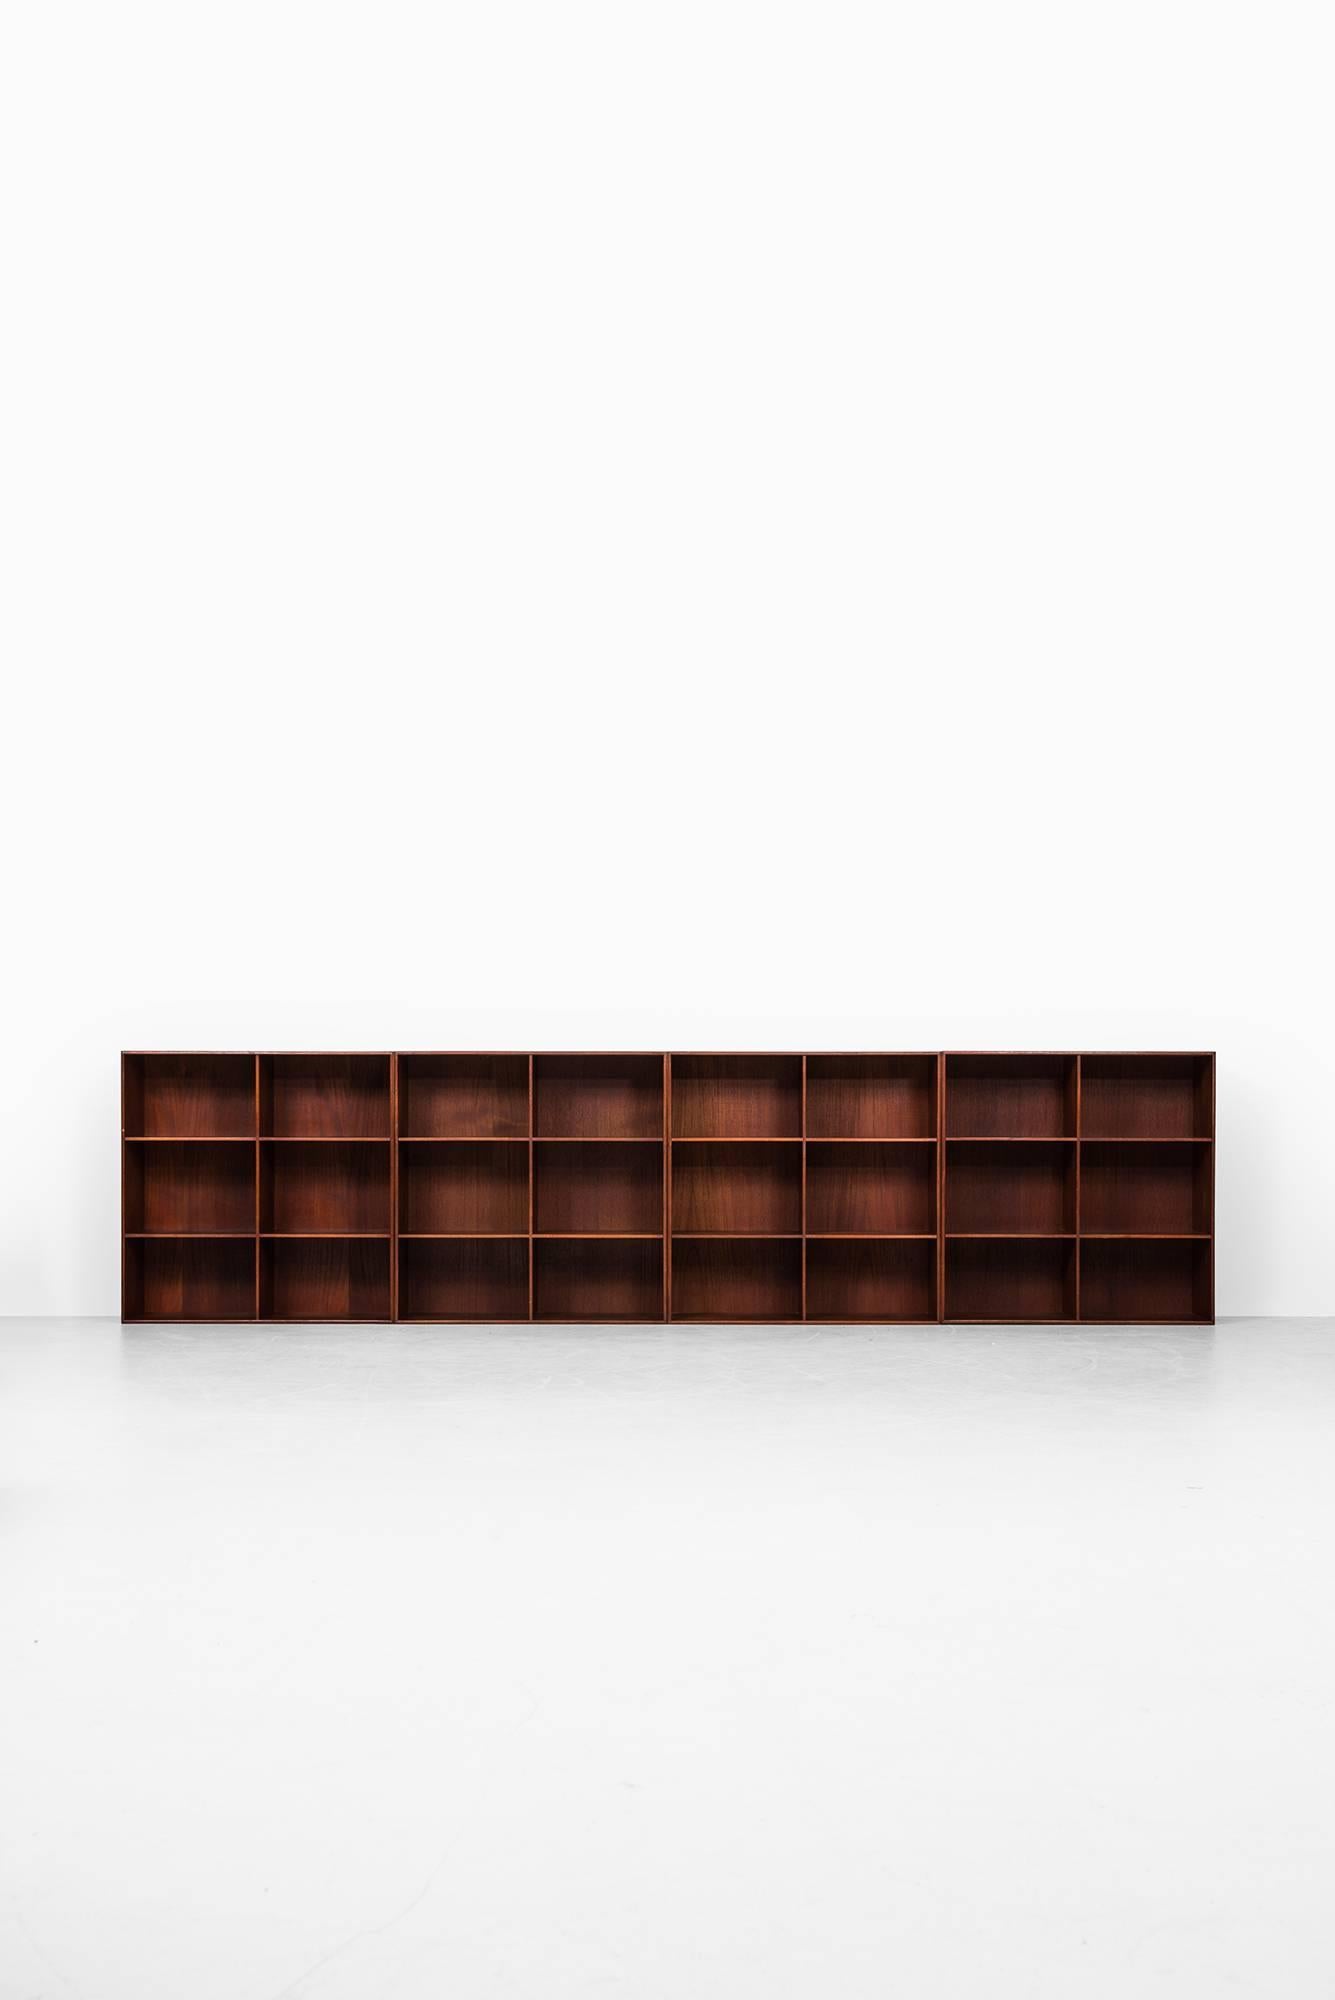 Set of four bookcases designed by Mogens Koch. Produced by Rud Rasmussen in Denmark.